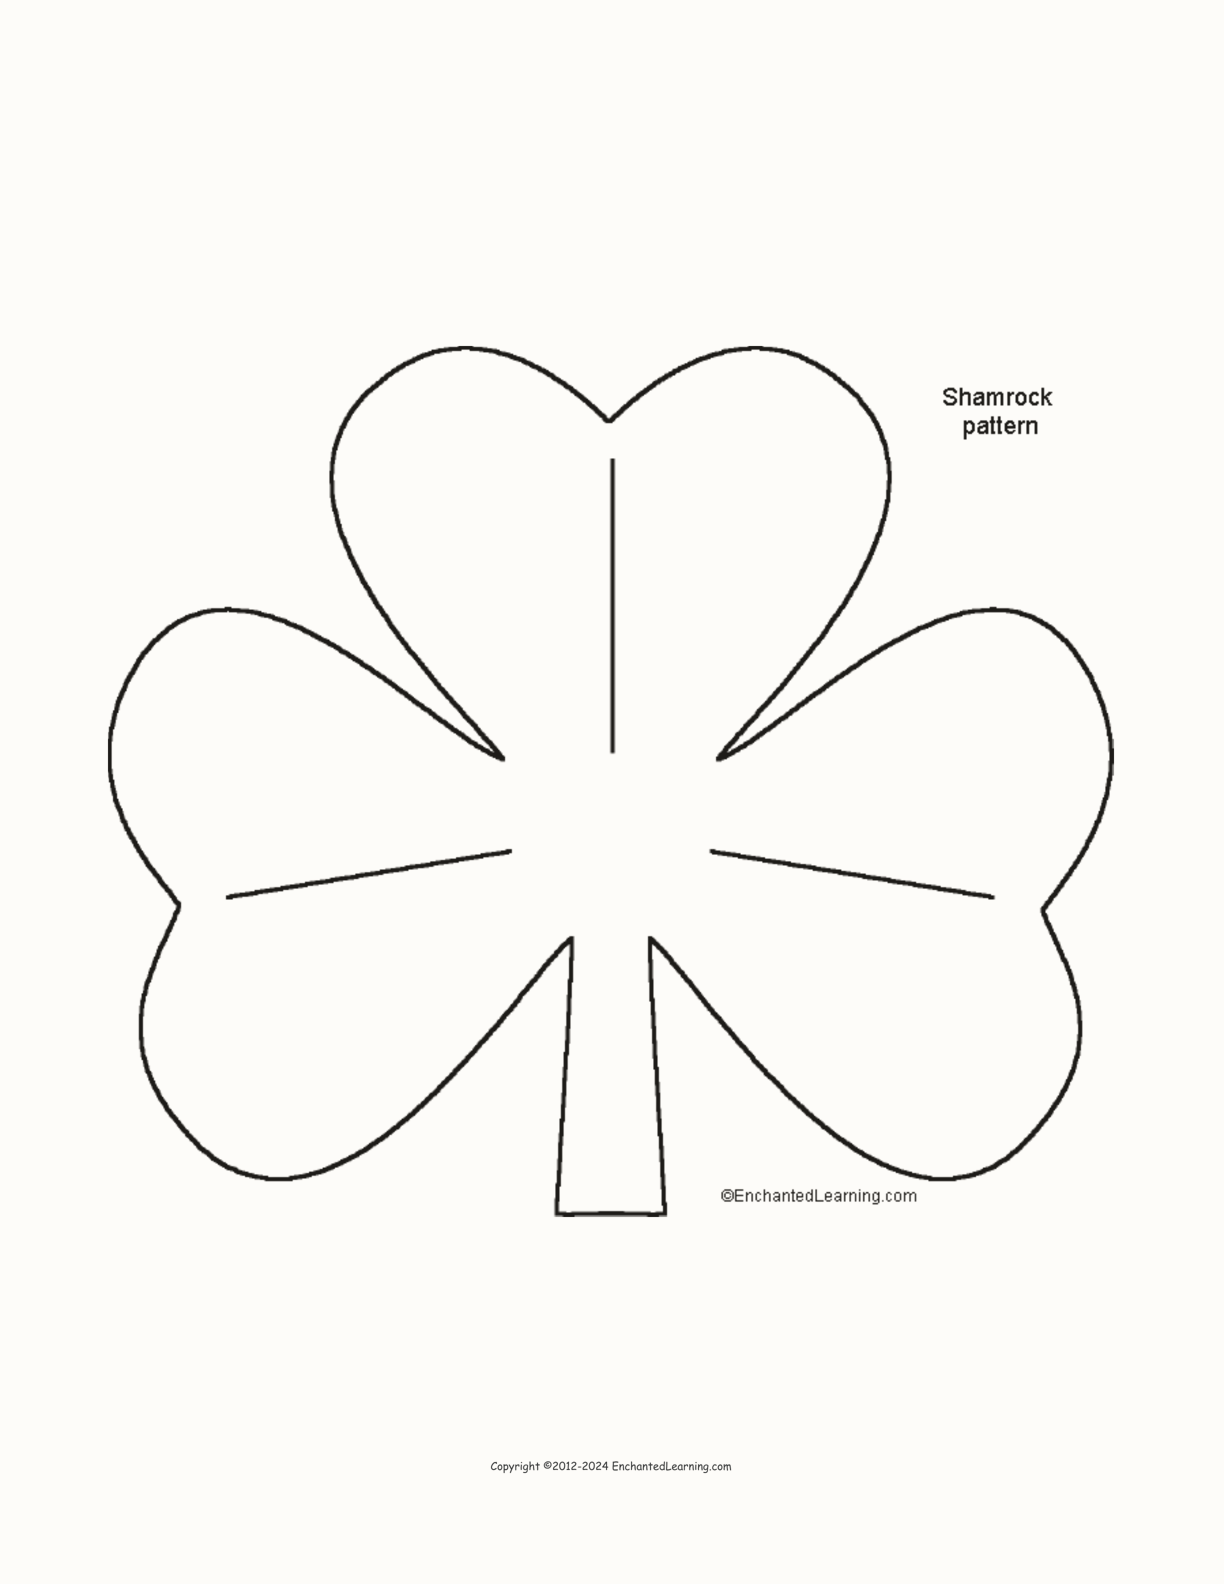 Stand-up Shamrock Template interactive printout page 1